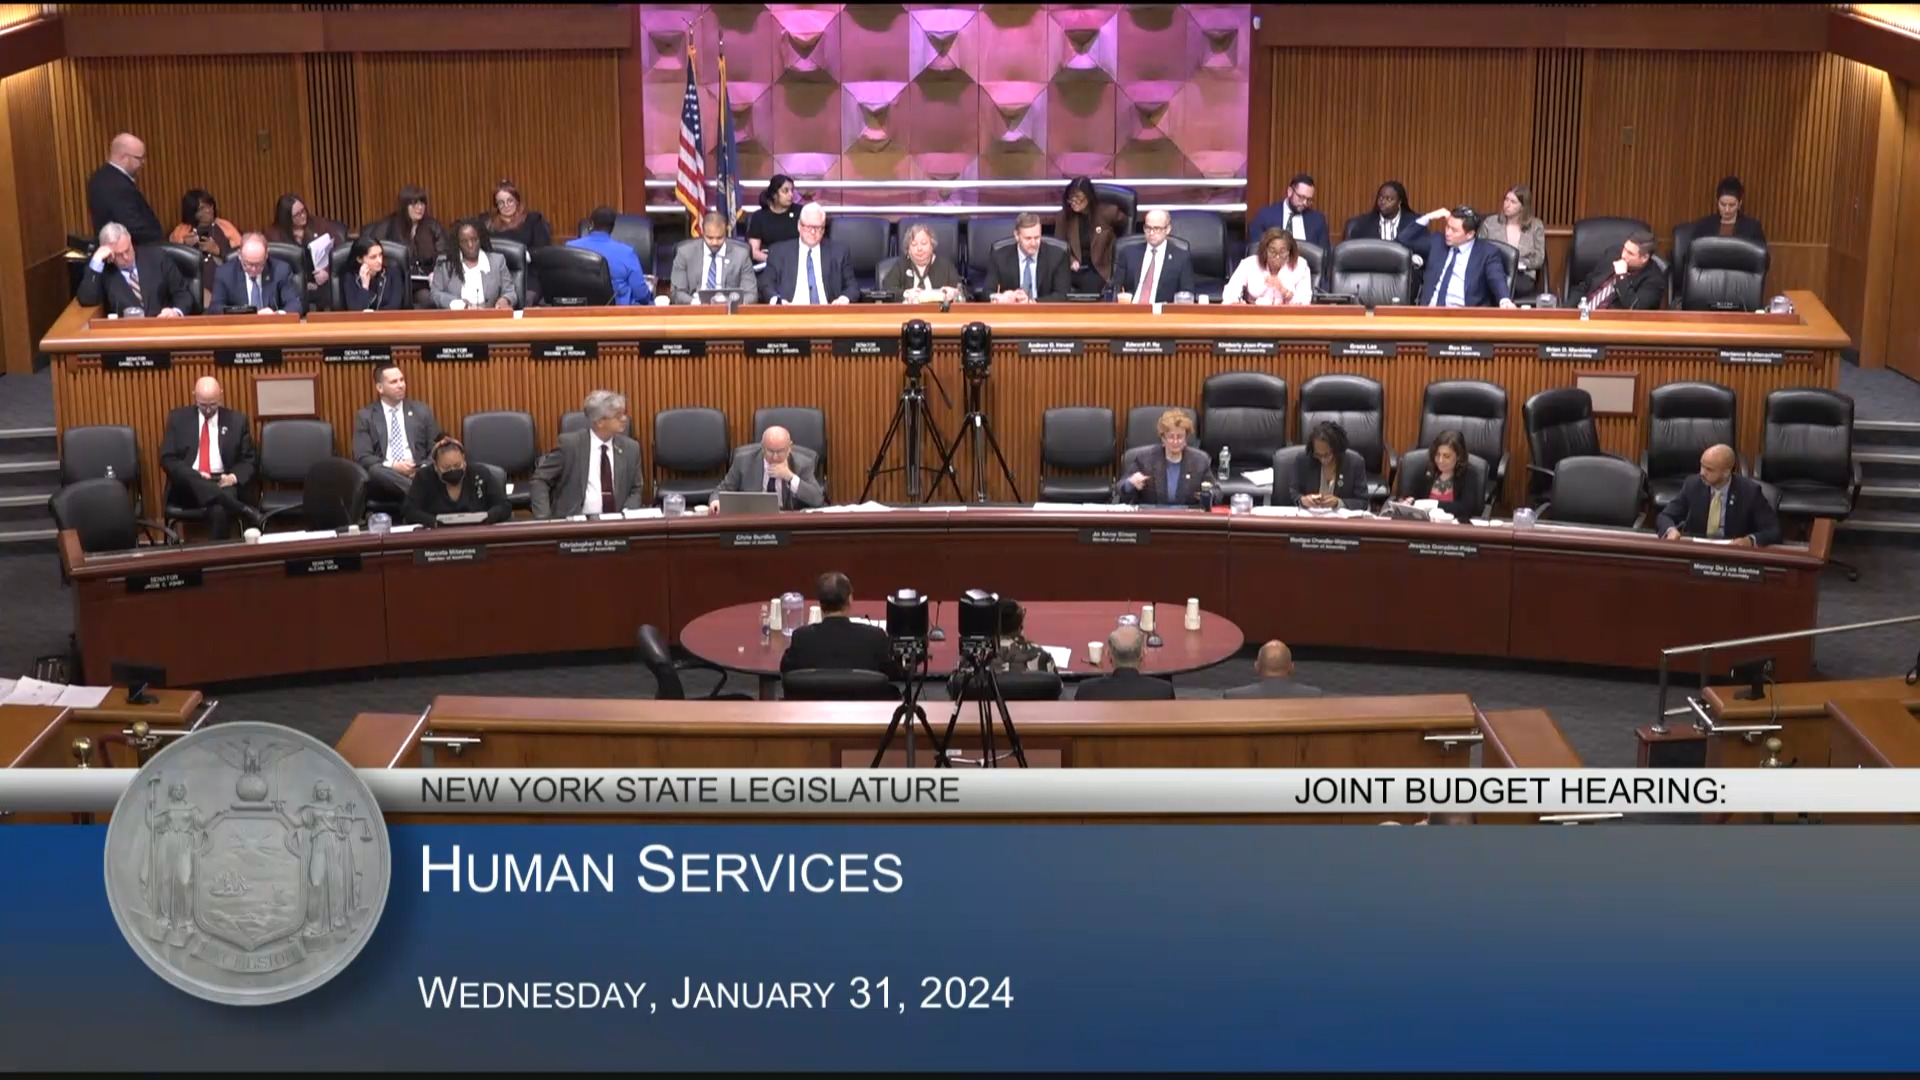 Veterans’ Affairs Commissioner Testifies During Budget Hearing on Human Services